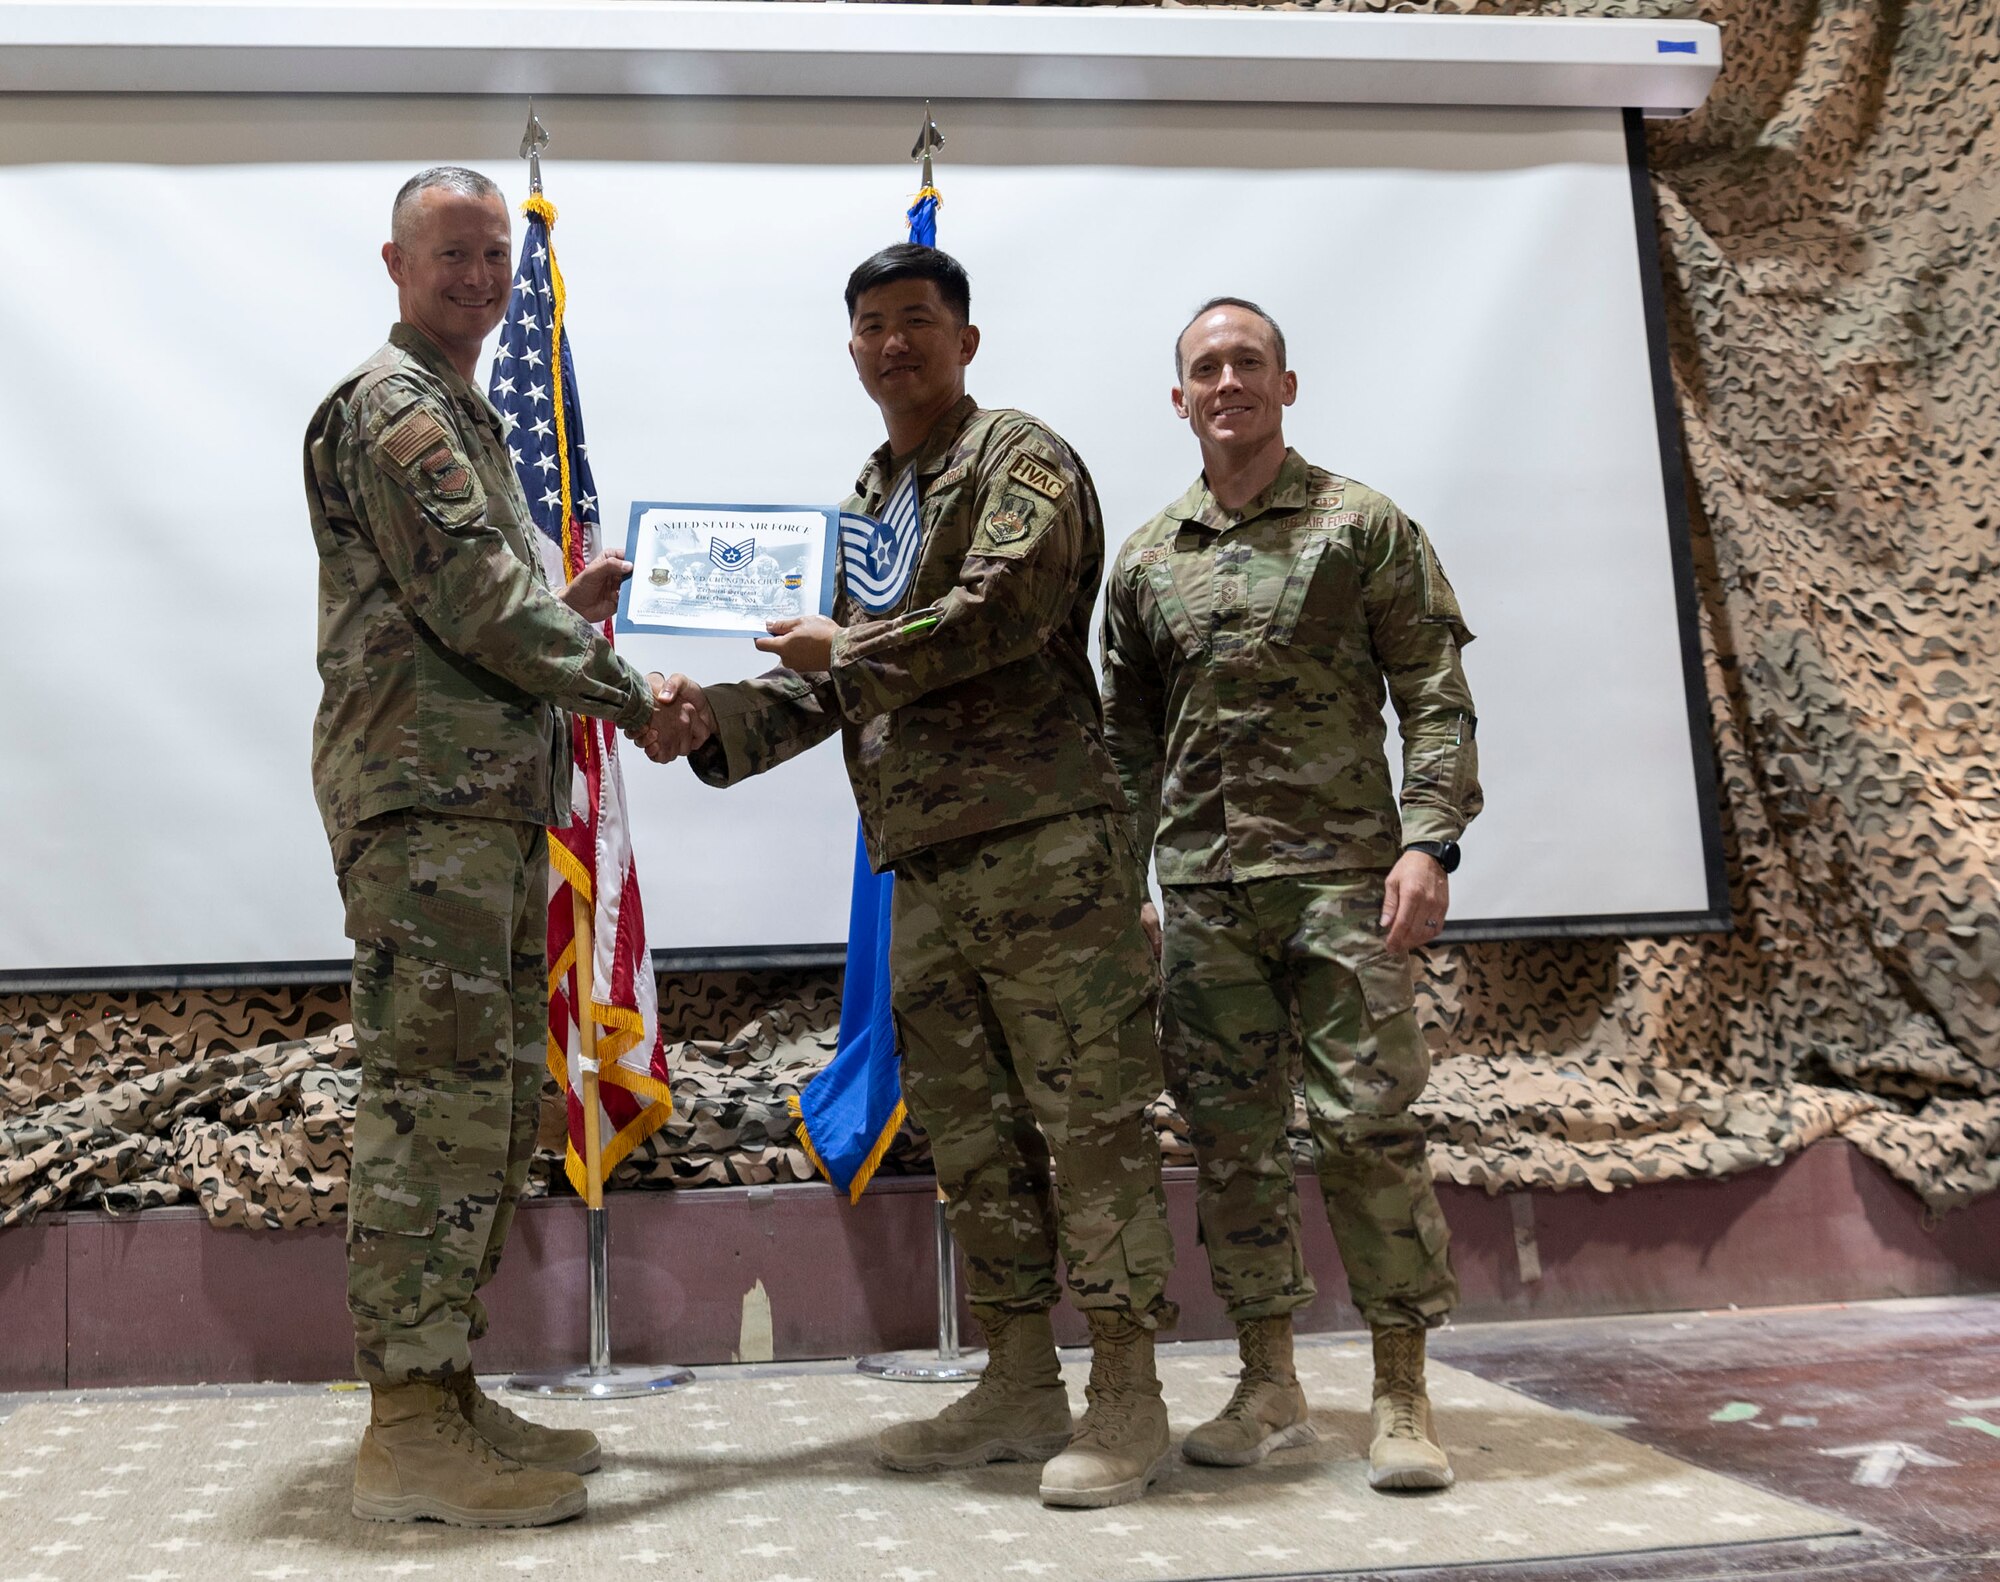 The 332d Air Expeditionary Wing celebrates with an E-6 release party for those Airmen selected to promote to Technical Sergeant at an undisclosed location in Southwest Asia, July 23, 2022. 332d AEW Commander Brigadier General R. Ryan Messer along with Command Chief Master Sergeant Kevin M. Eberlin help celebrate the occasion. Promotion to TSgt is very competitive, this year the promotion rate is only 16%. Promotions exemplify technical skills, leadership, and a standard of excellence. (U.S Air Force photo by Tech. Sgt. Jeffery Foster)